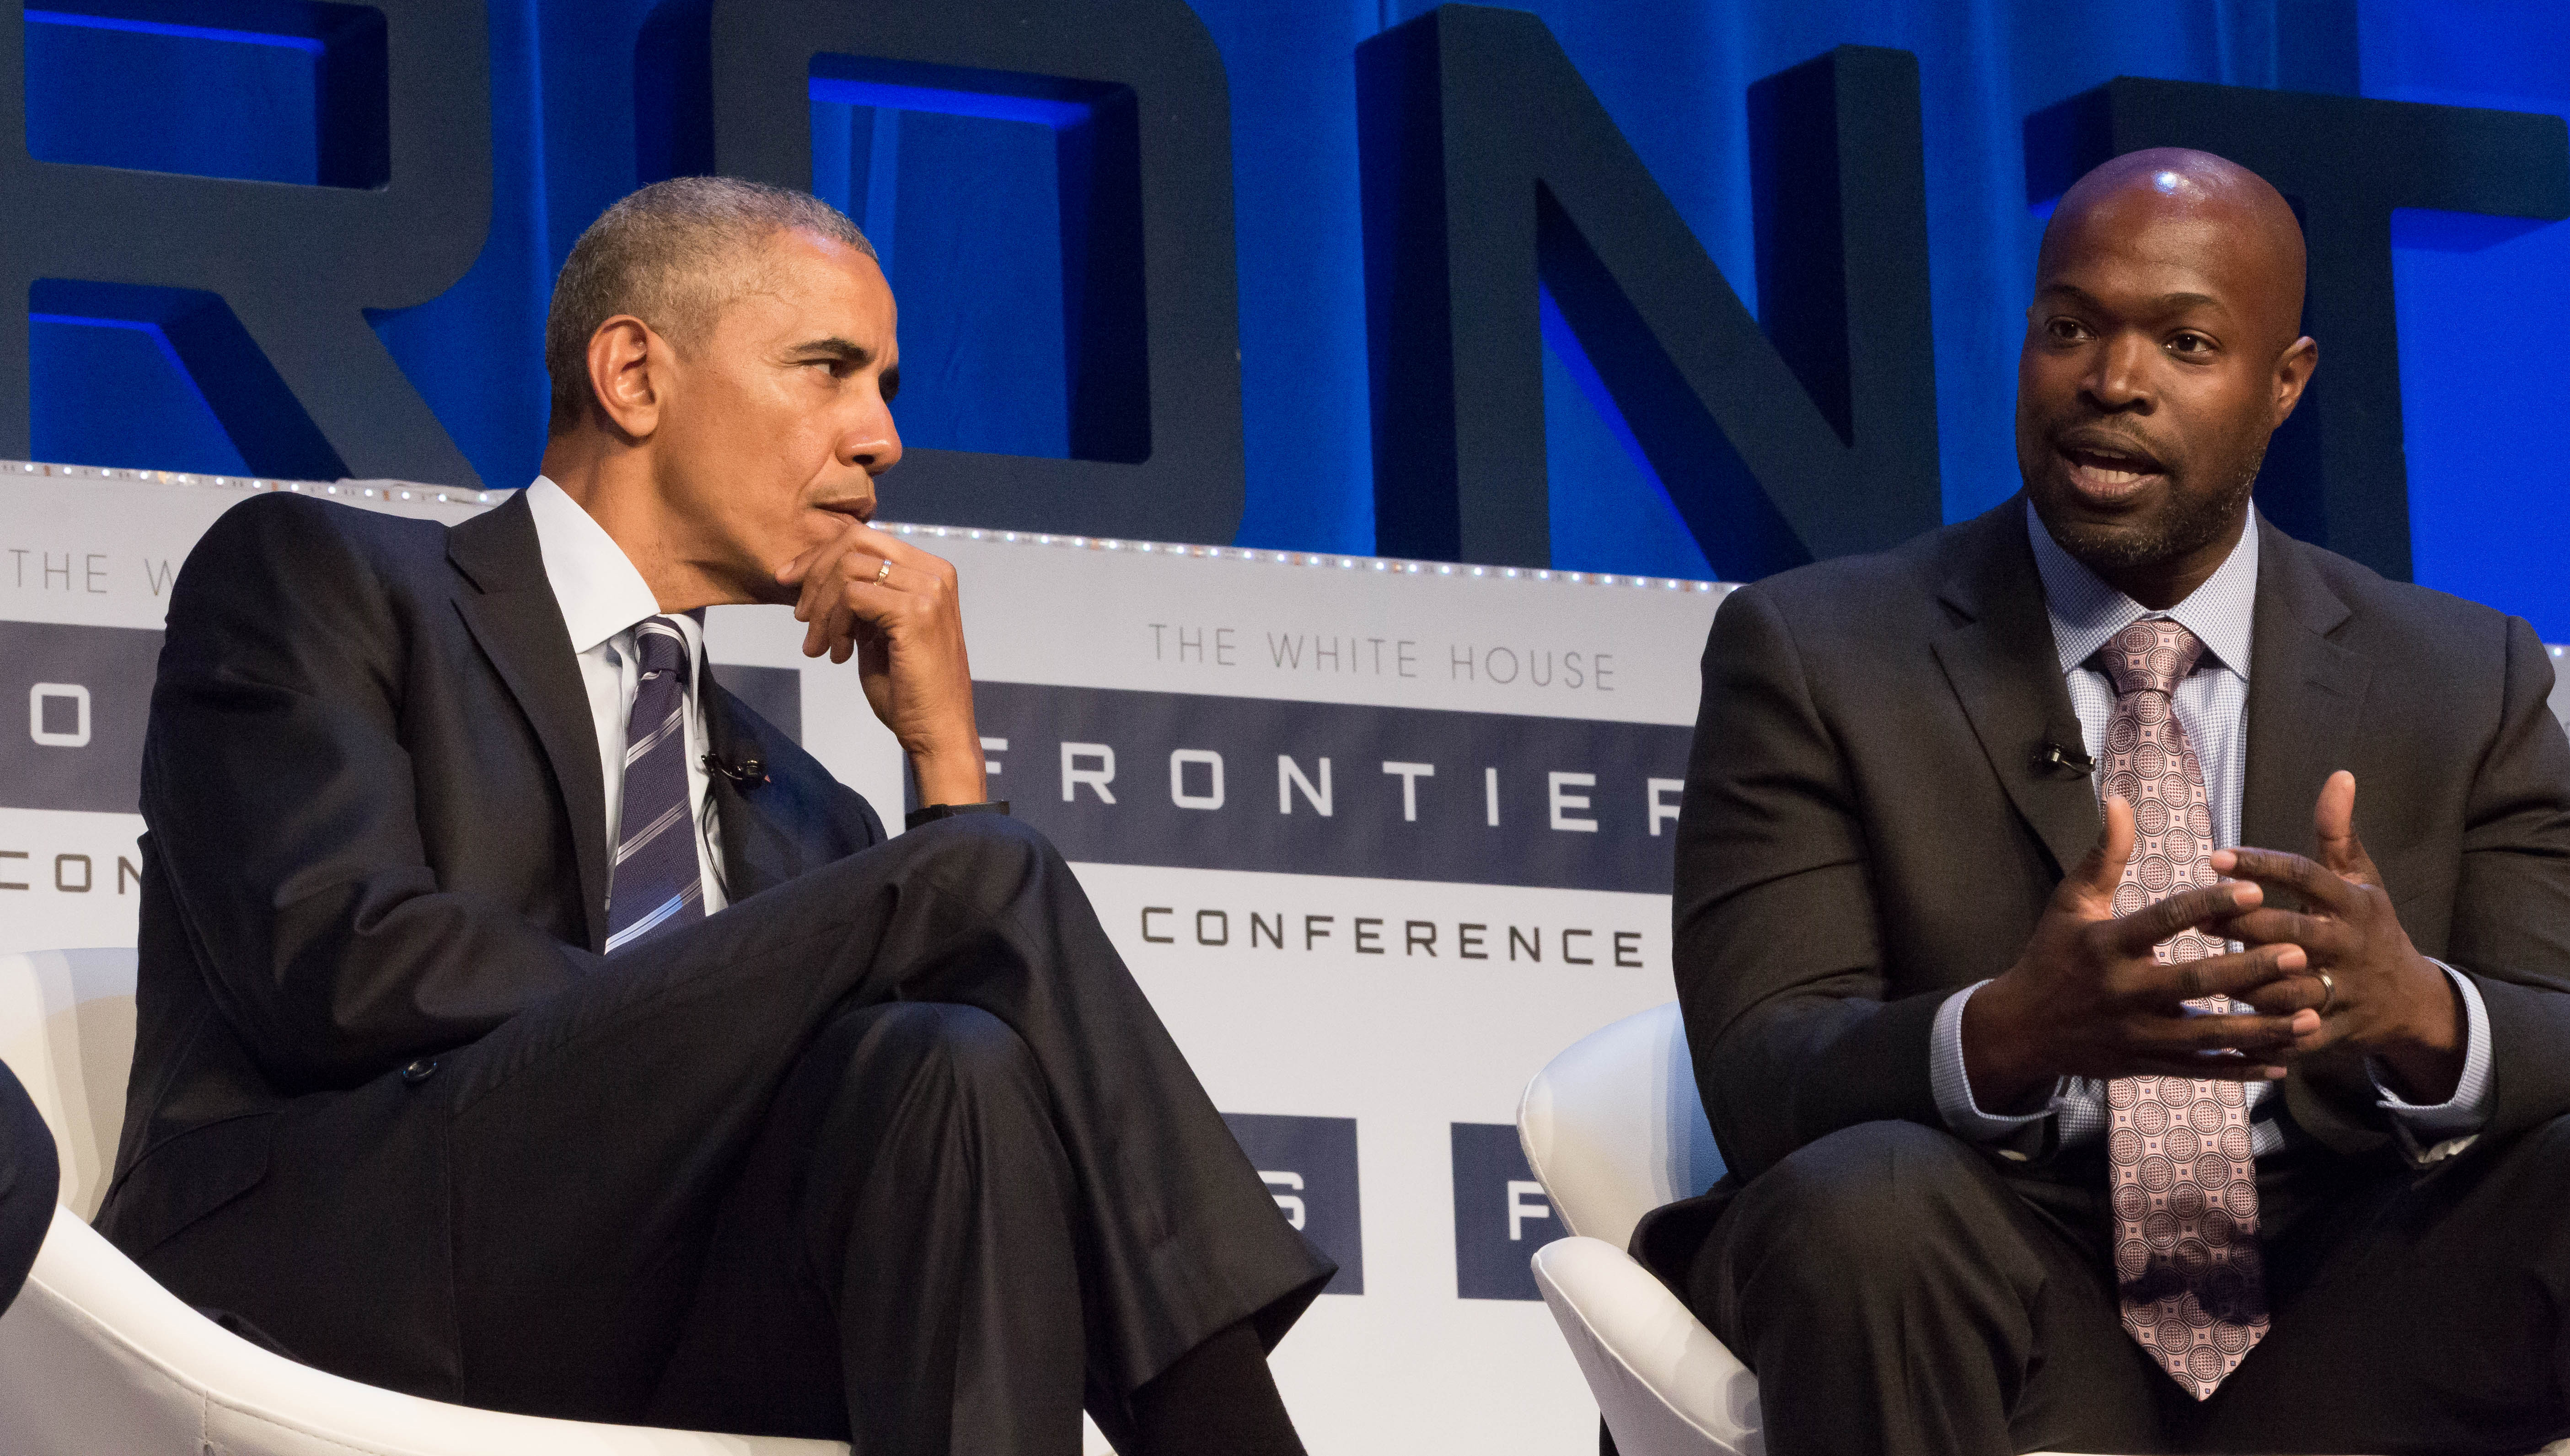 President Barack Obama speaking with a panelist at the 2016 White House Frontiers Conference at Carnegie Mellon University